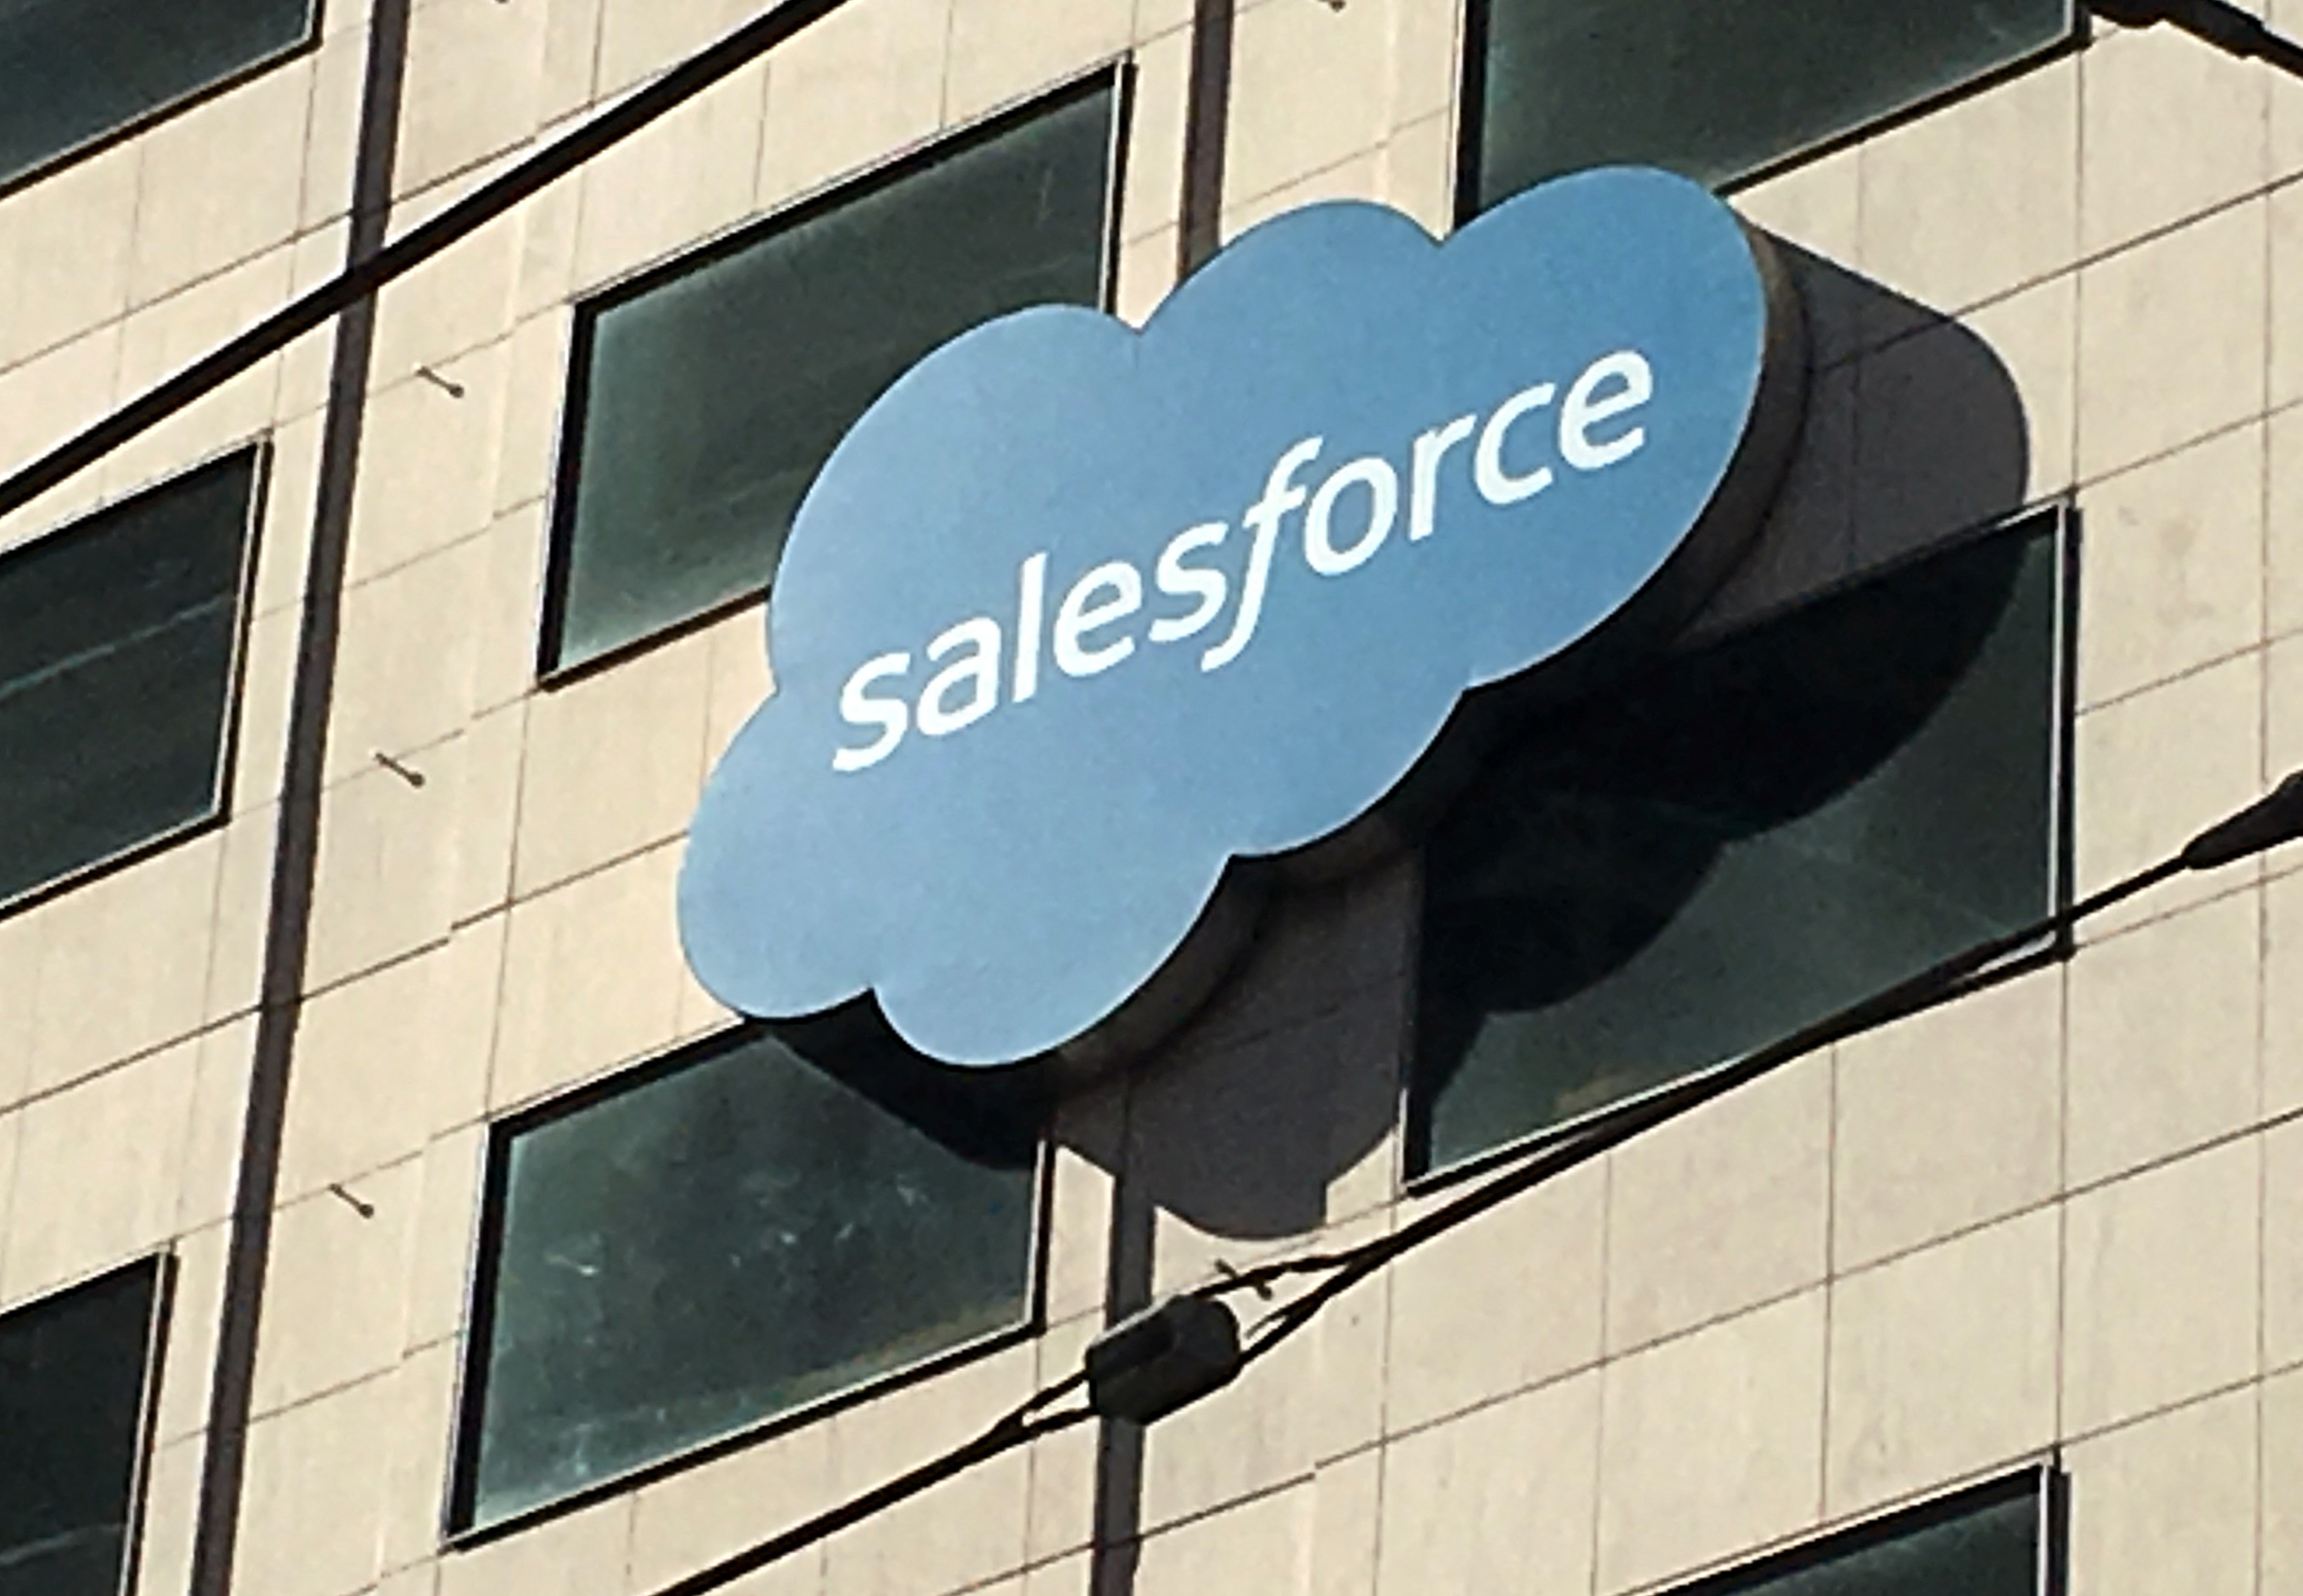 The Salesforce logo is pictured on a building in San Francisco